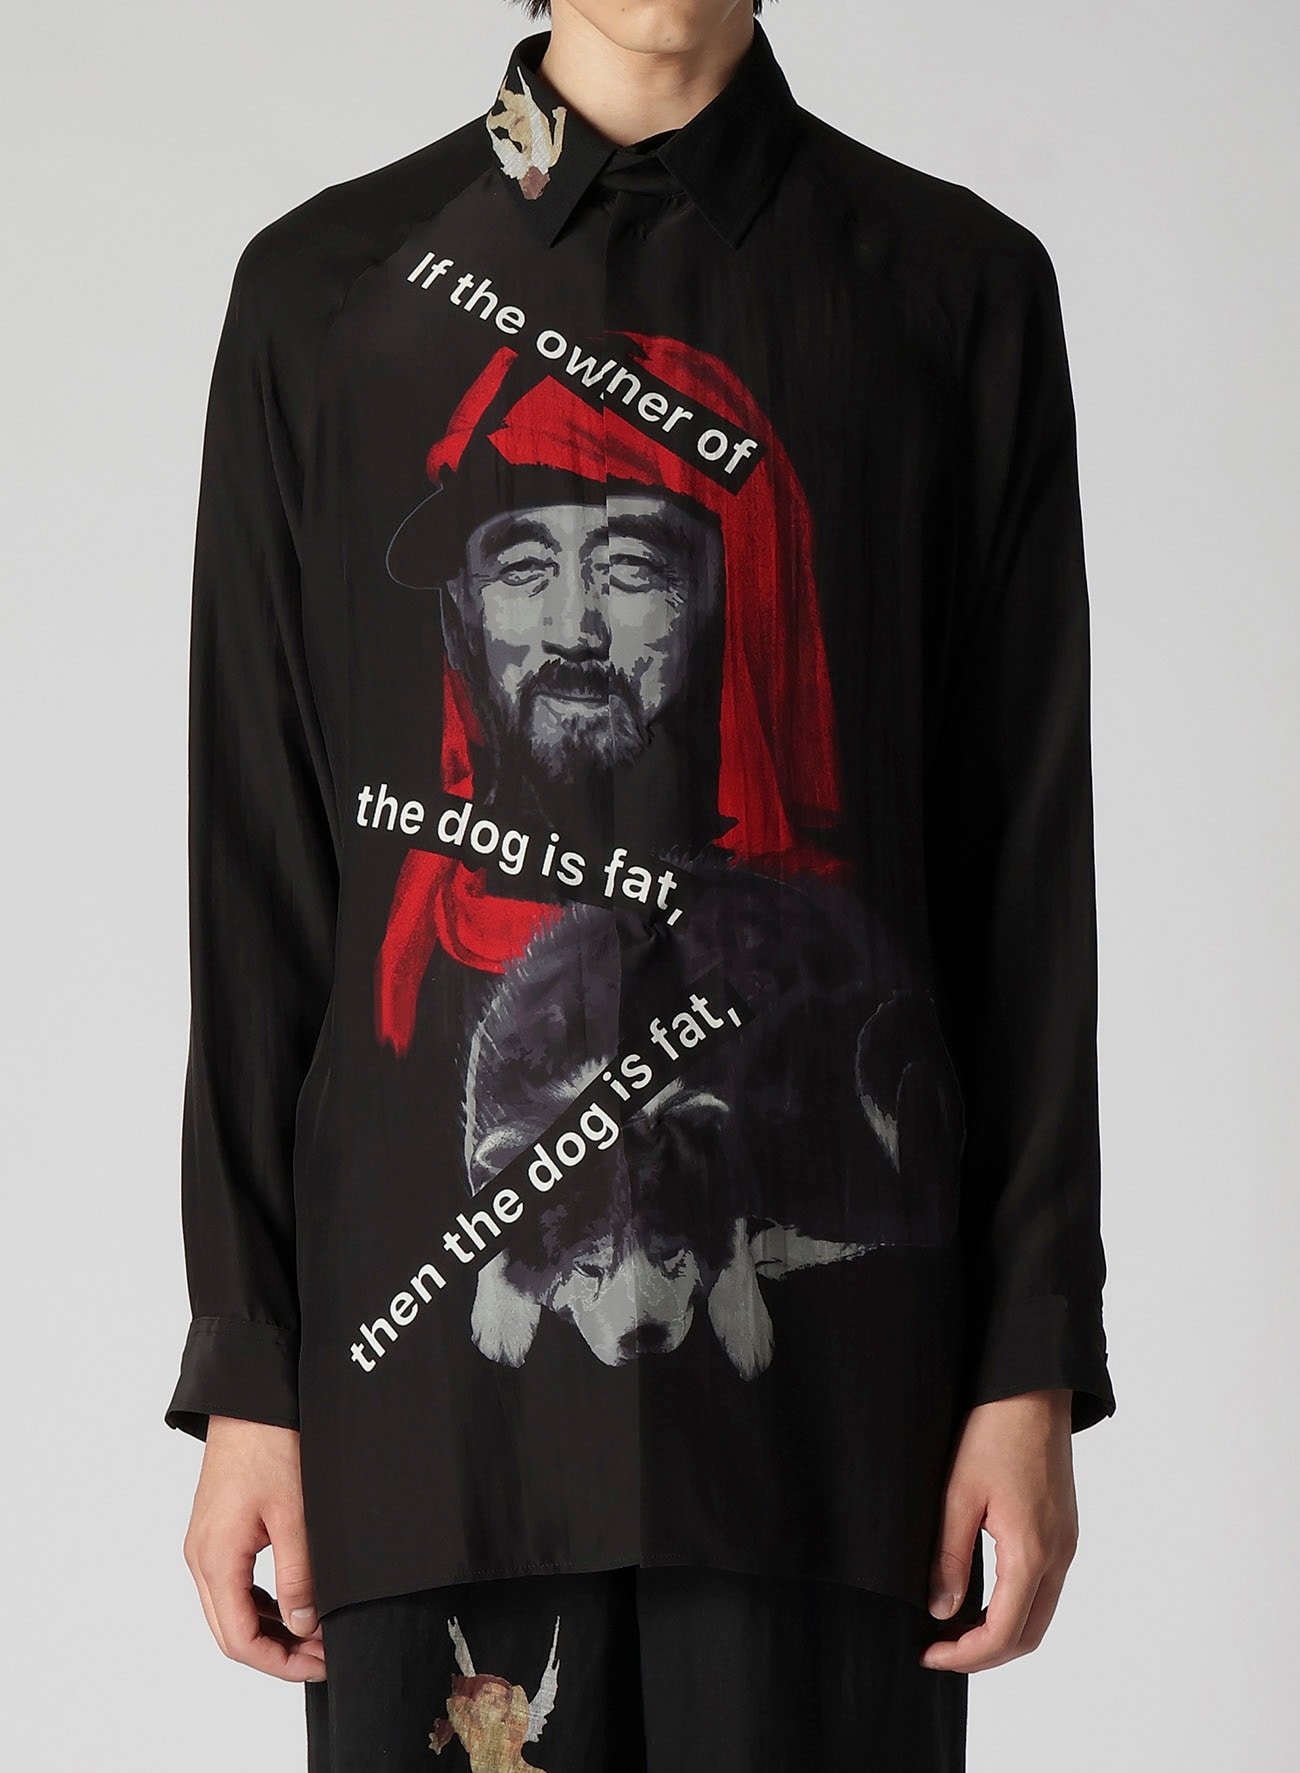 DOG AND ELDERLY PERSON SHIRT